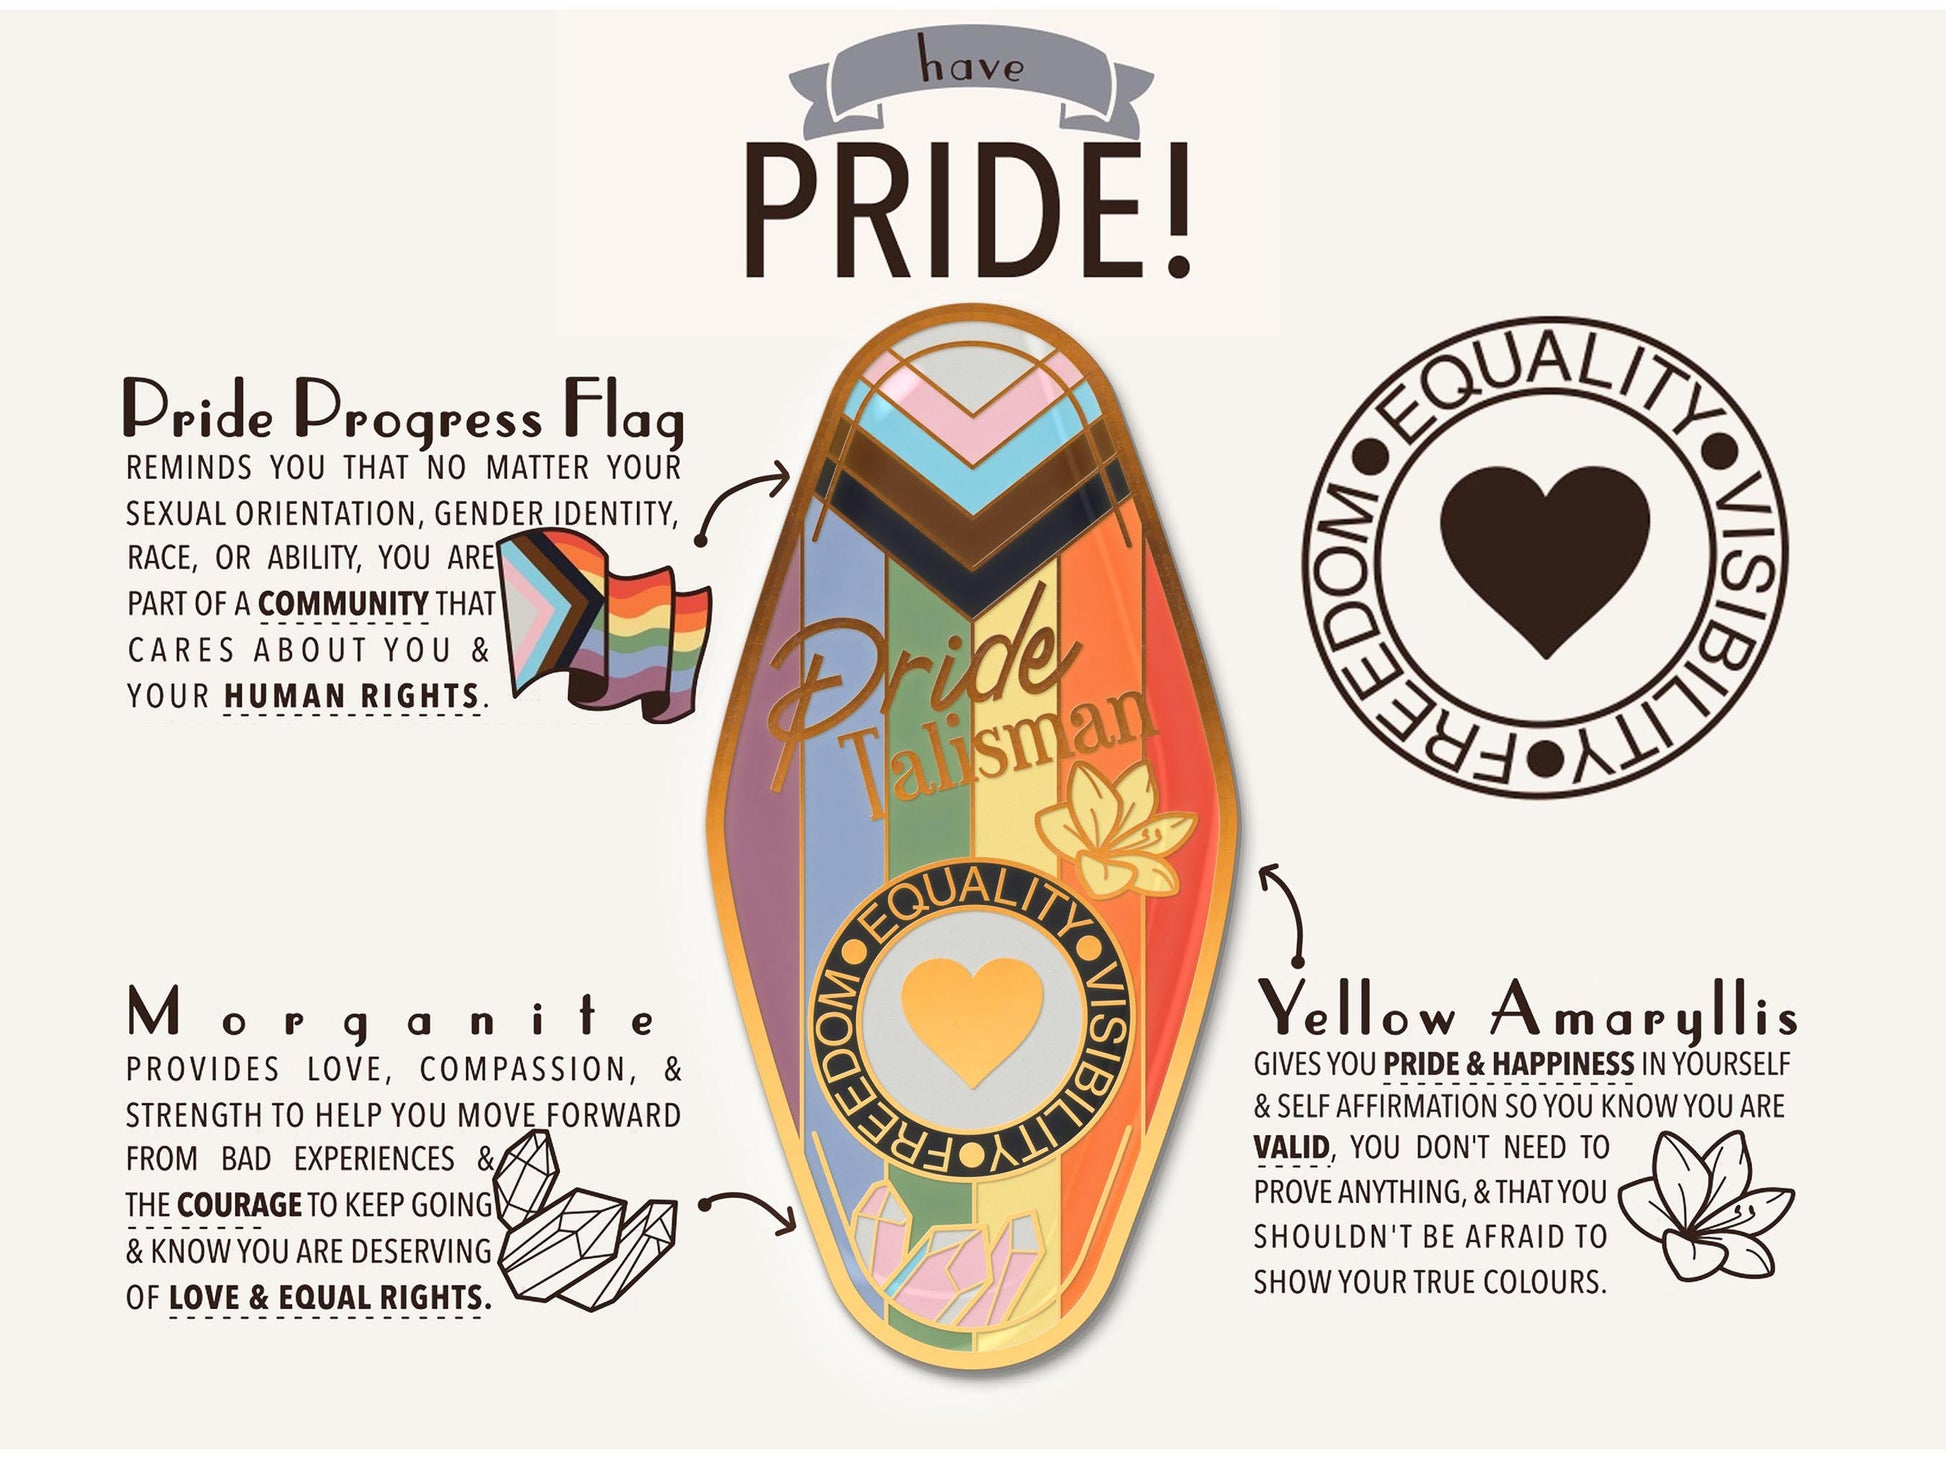 A illustrated diagram outline the symbolism of the different design elements of the for a Pride Talisman pin. Information includes the meaning of the Progress Pride Flag, Morganite and Yellow Amaryllis.